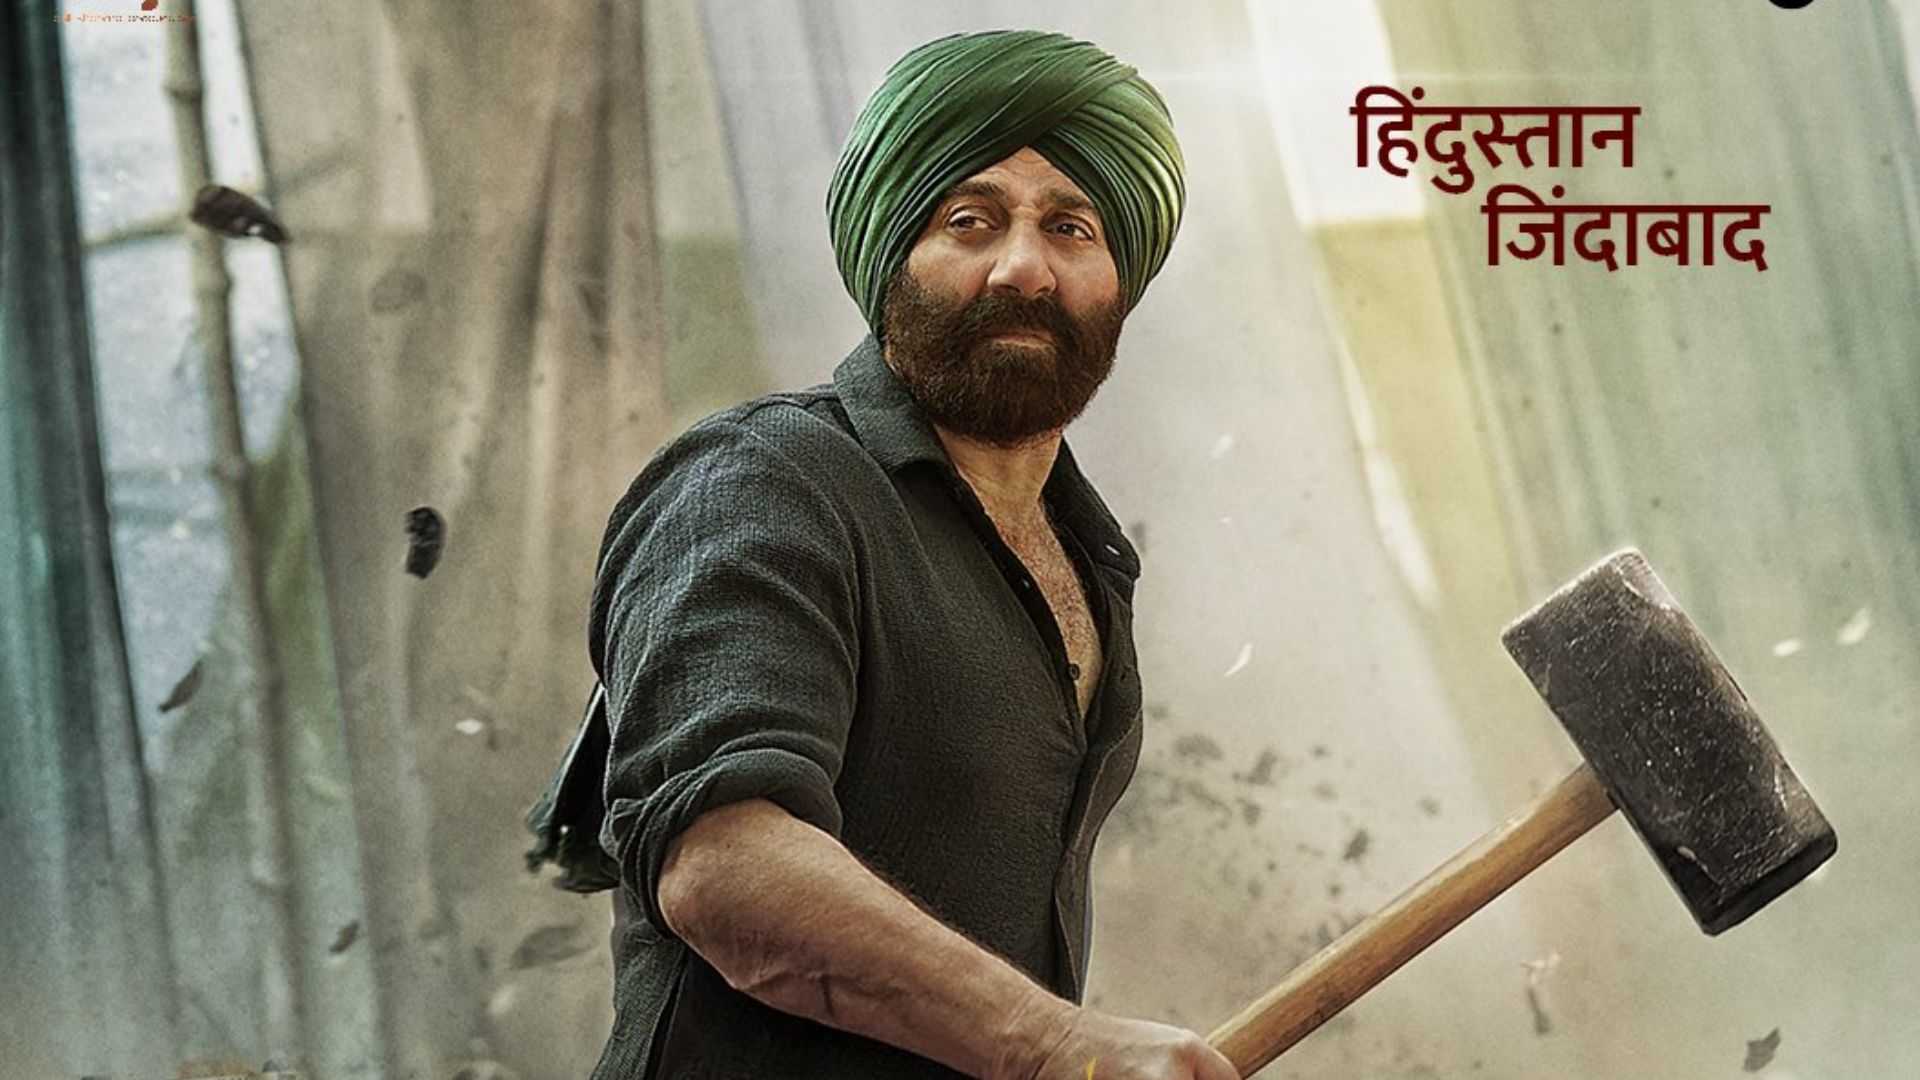 'Pathaan se jyada collection krne wali ye': Sunny Deol's Gadar 2 release date announcement leaves netizens excited